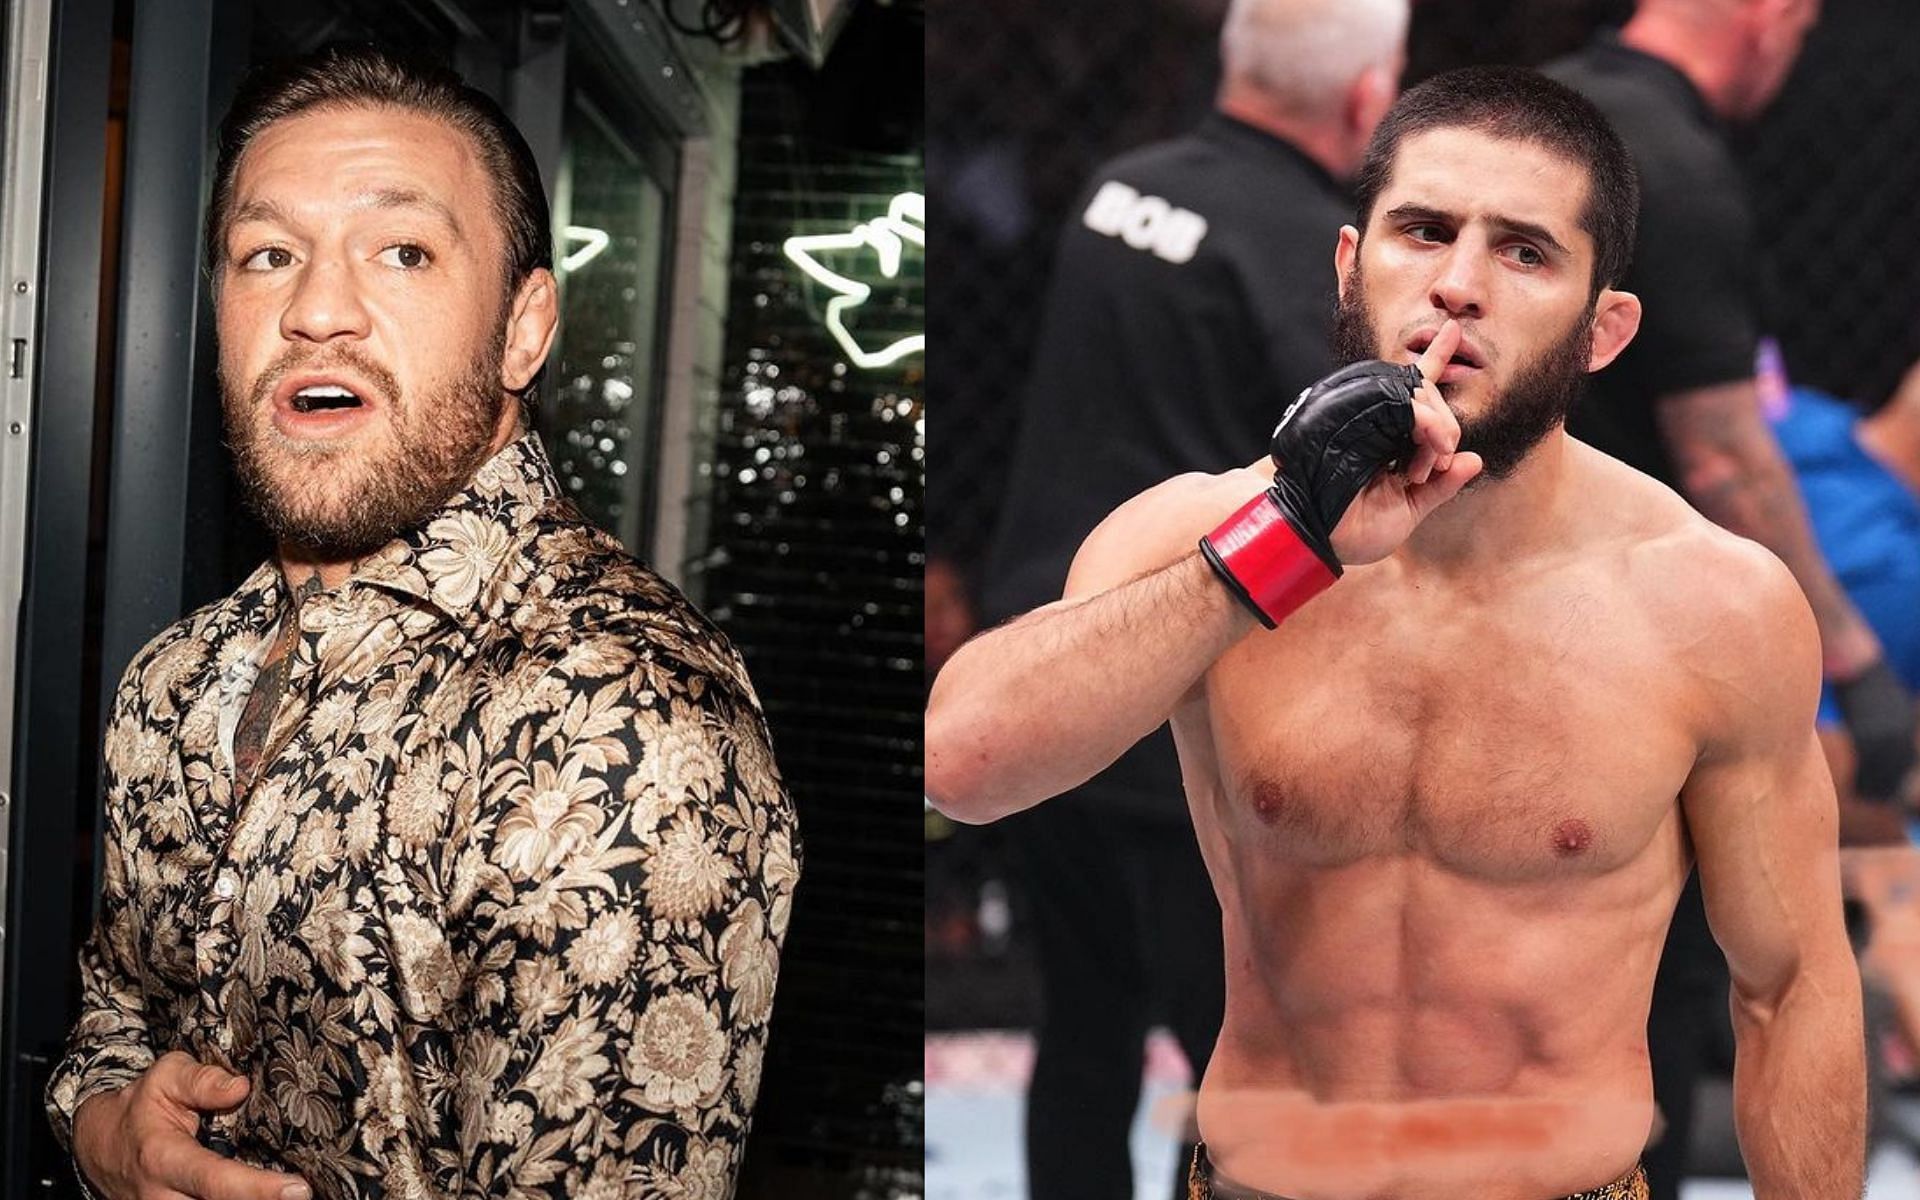 Conor McGregor (Left) spews heated words of warning at Islam Makhachev (Right) [Images via: @thenotoriousmma and @islam_makhachev on Instagram]